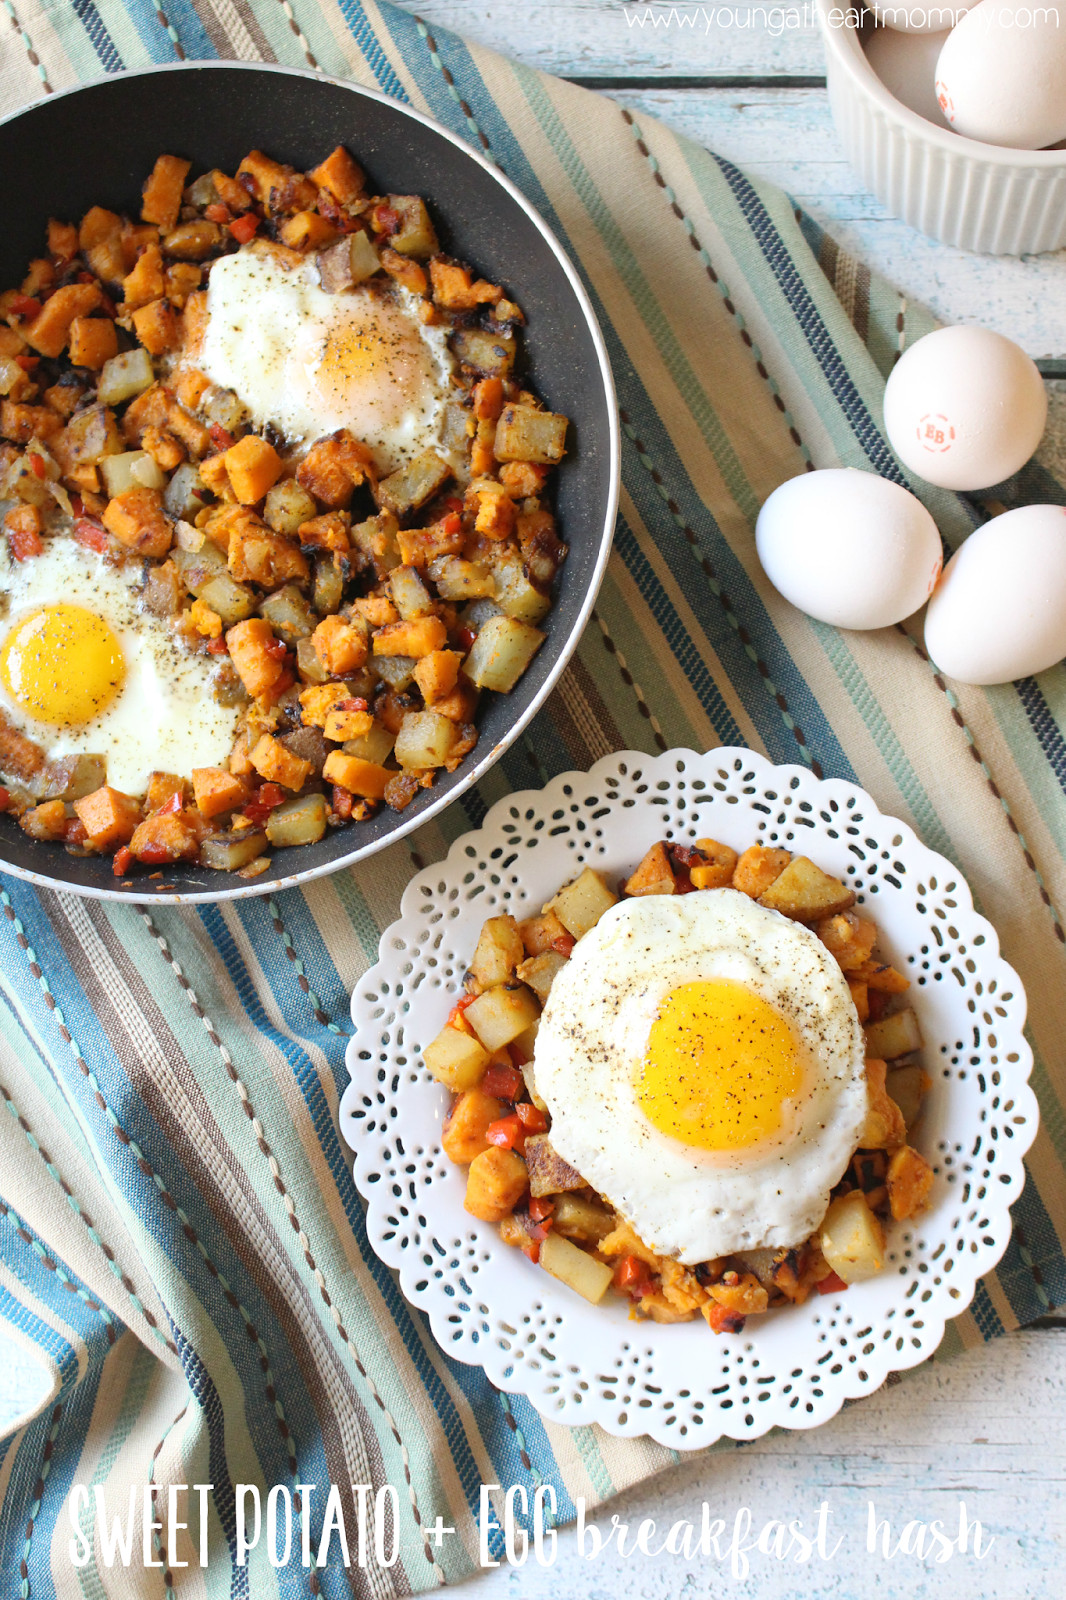 Breakfast Hash Recipes
 Savory Sweet Potato And Egg Breakfast Hash Young At